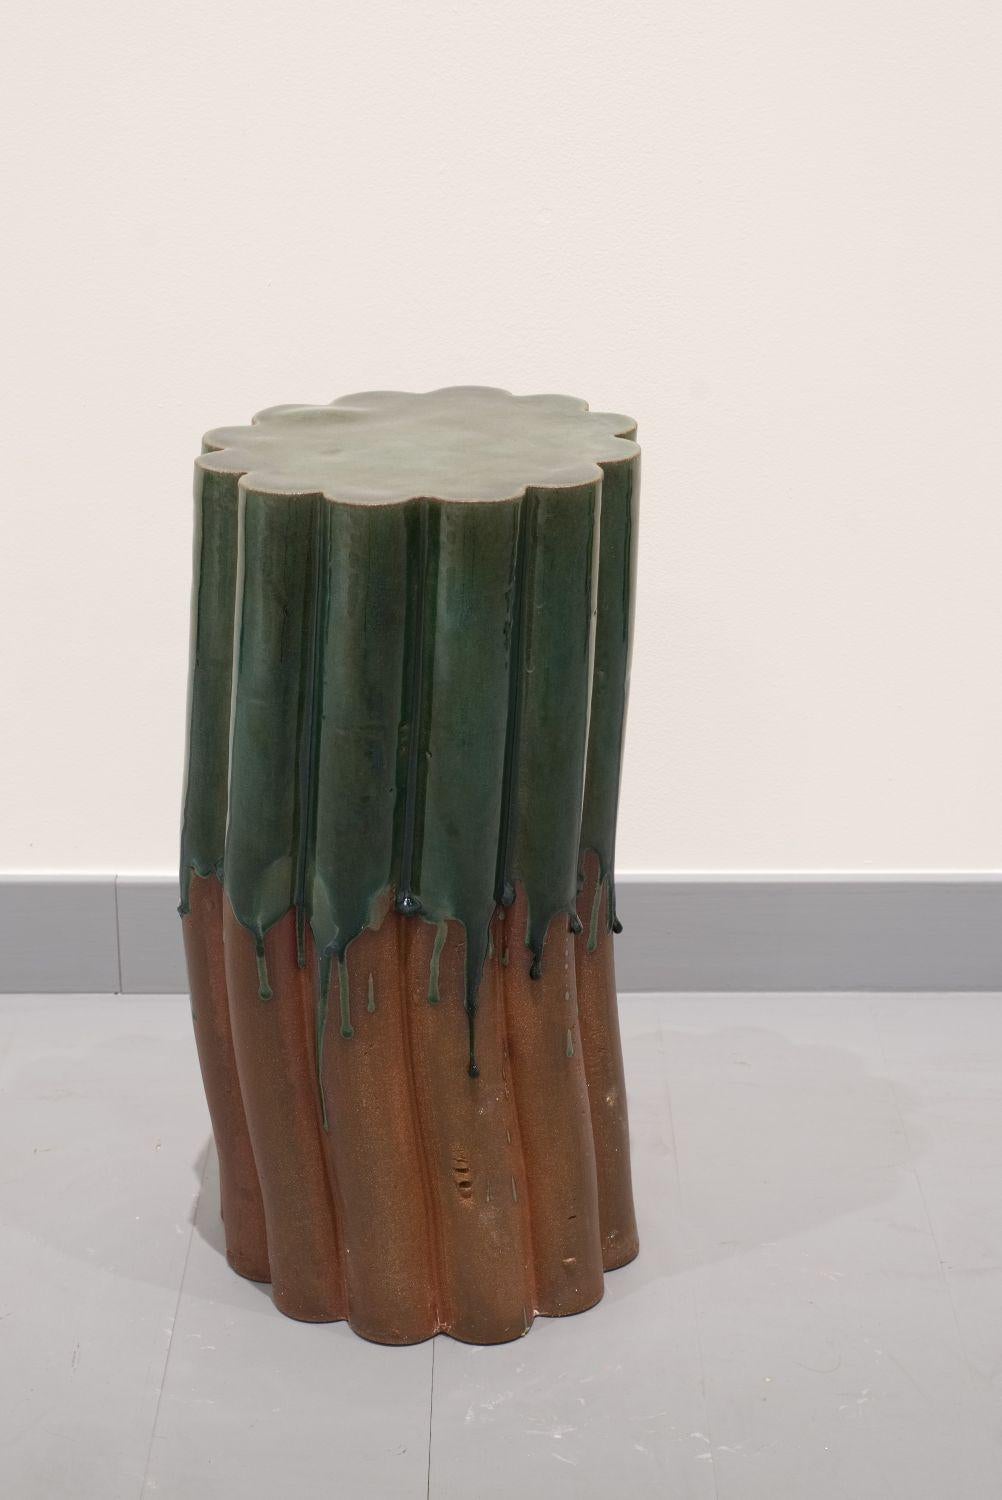 Pillar stool - Green - Medium by Milan Pekar
Dimensions: D22 x H45, 47 cm
Materials: Glaze, clay

Hand-crafted in the Czech Republic

Also available: different colors, heights and patterns.

Established own studio August 2009 – Focus mainly